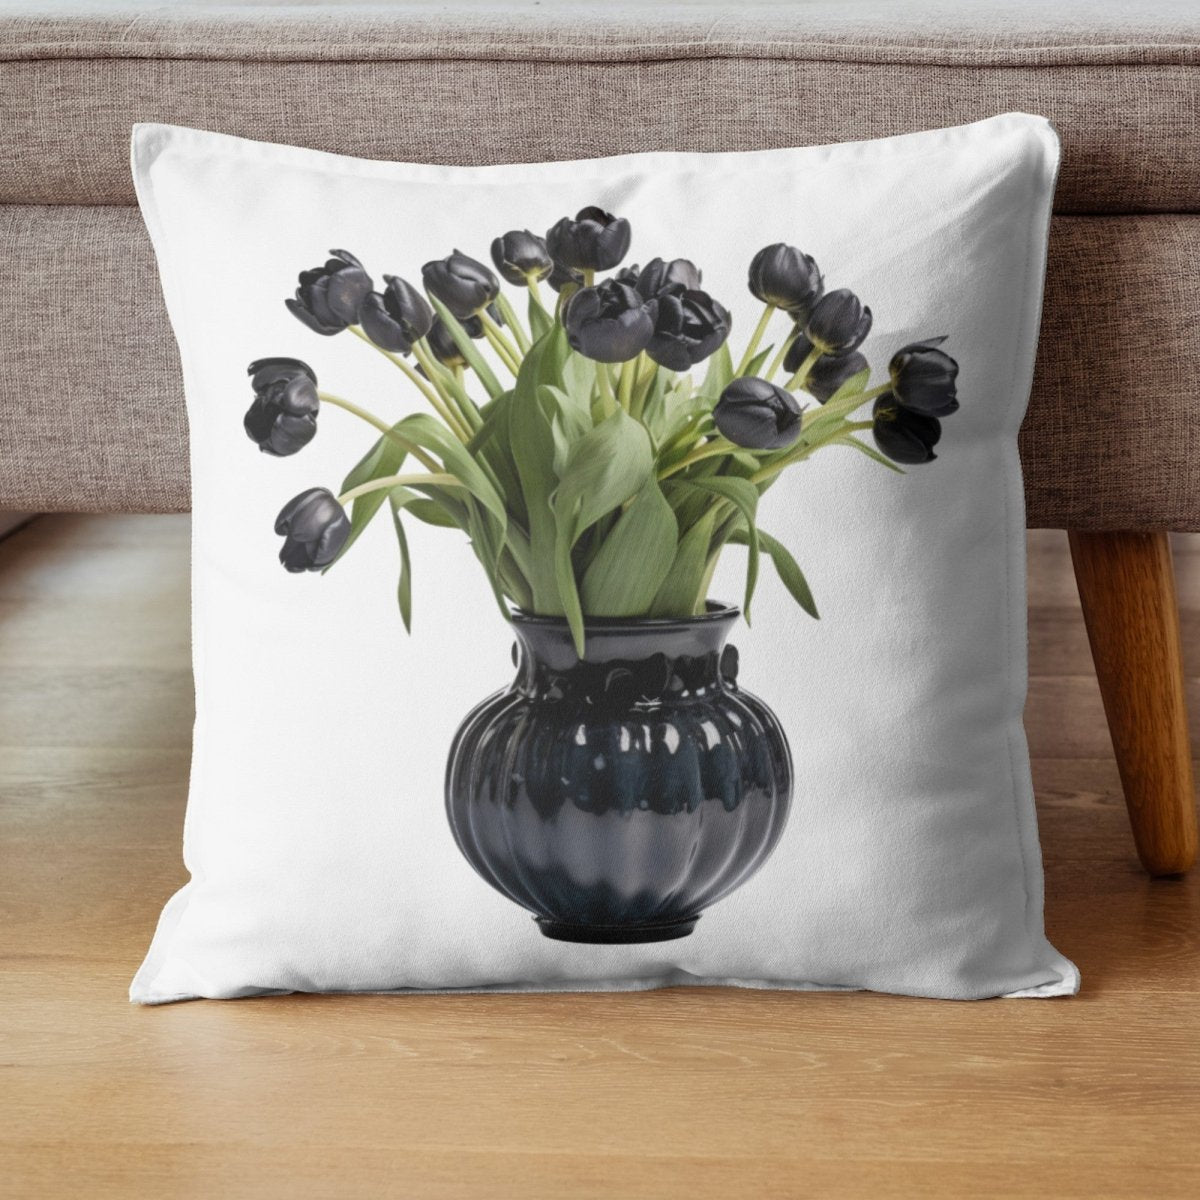 Black Tulips in Vase 6+6 PNG Clipart Bundle, Transparent Background, Photorealistic - Everything Pixel